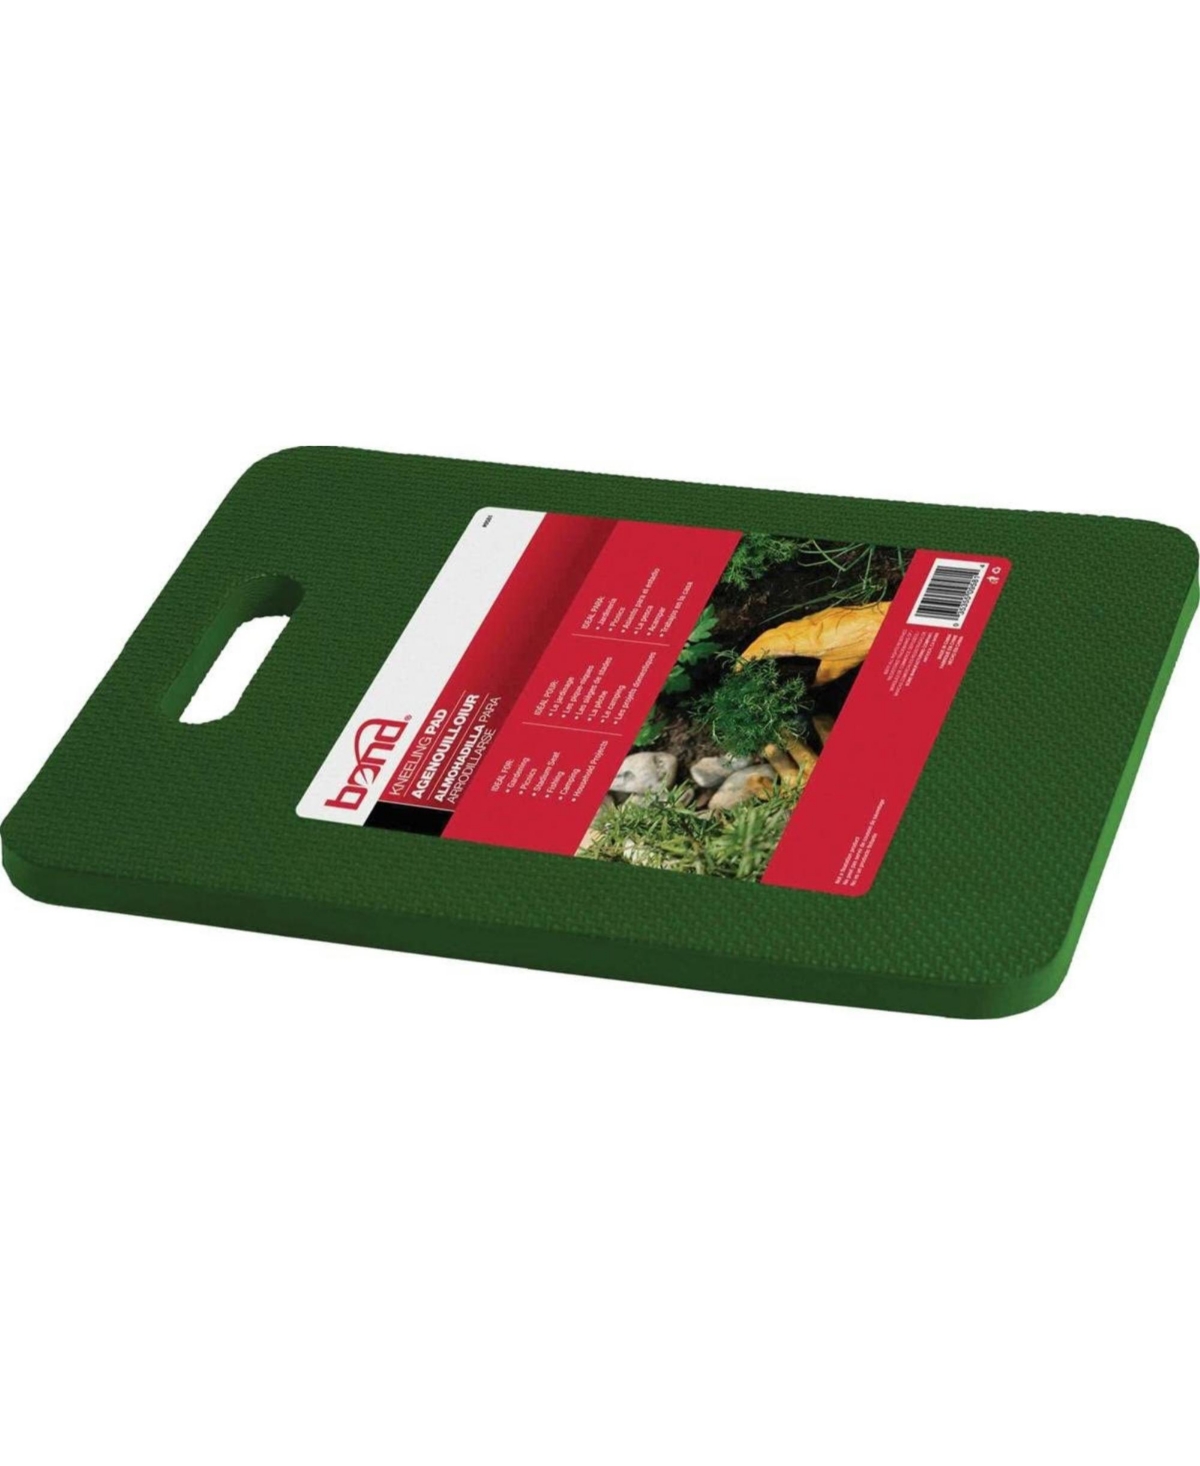 Bond Manufacturing Gardening Kneeling Pad, Green, Large 14 Inches - Pack of 1